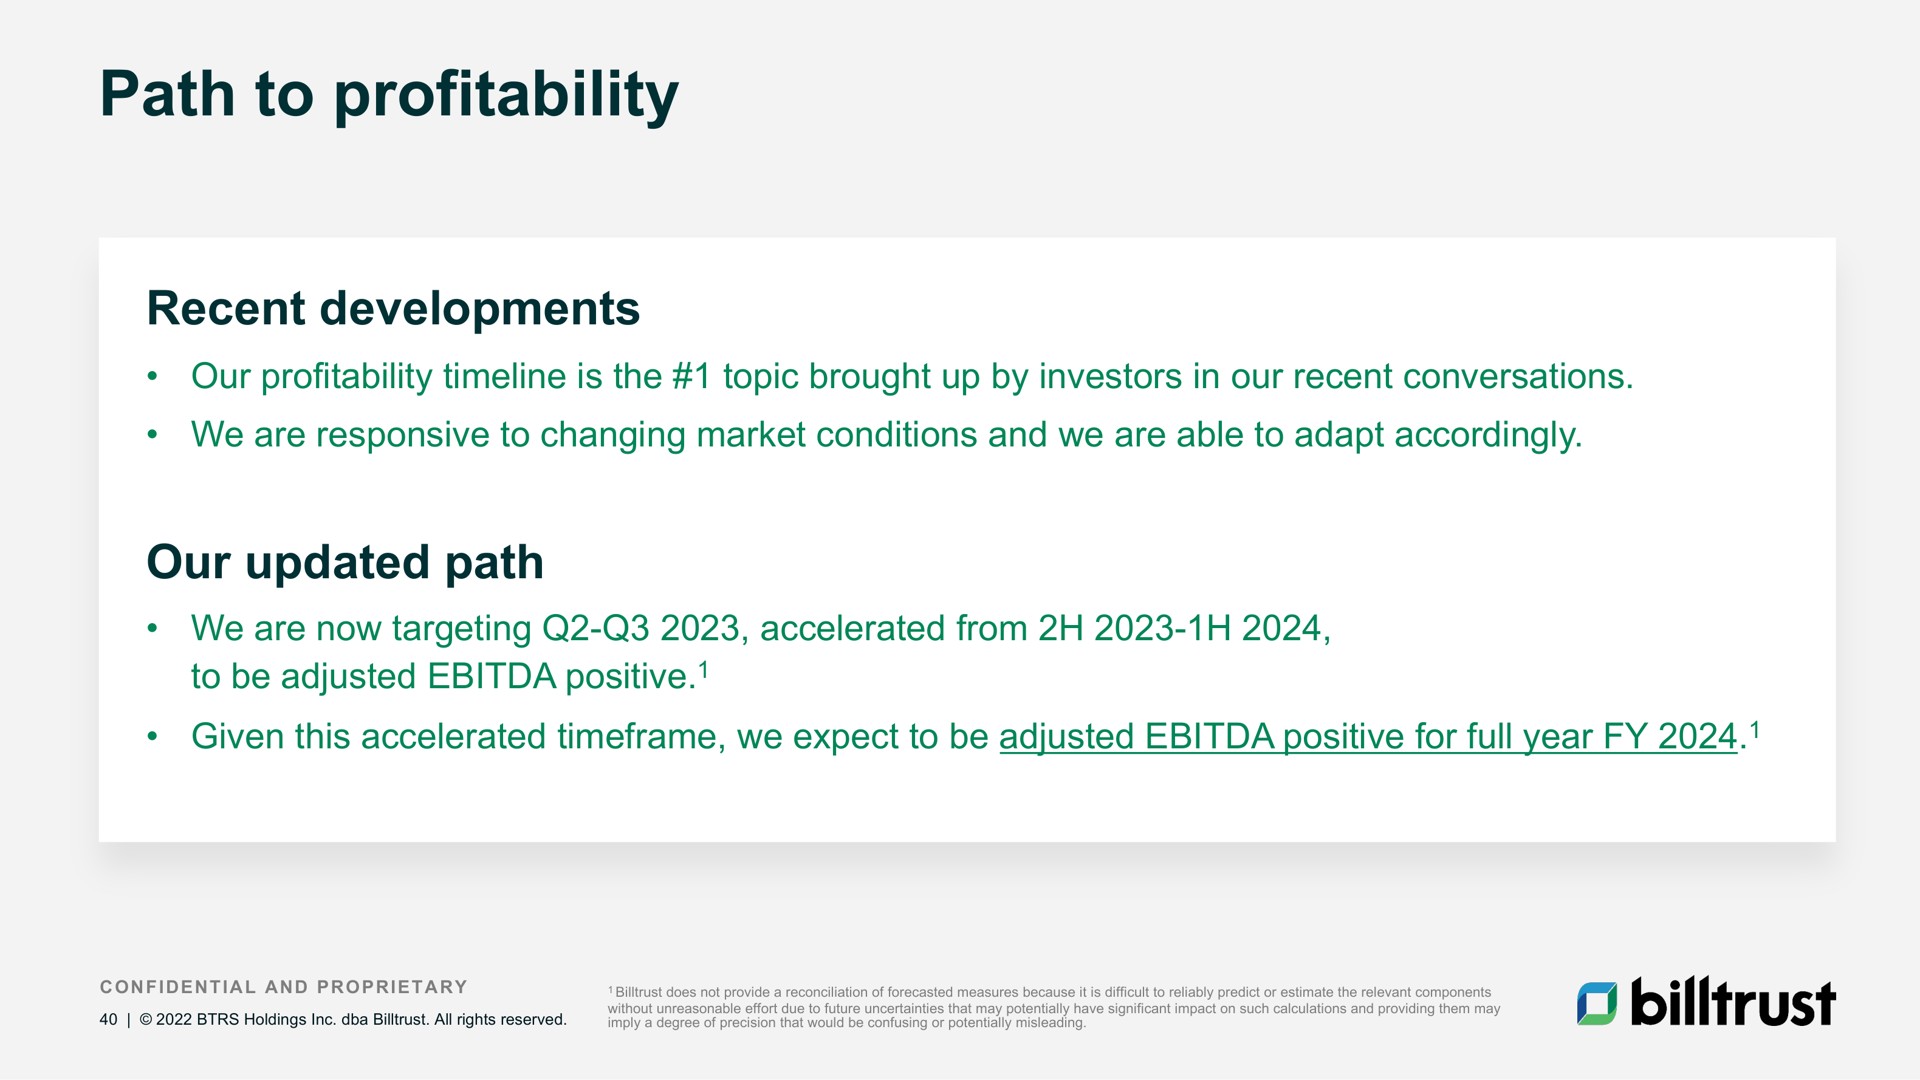 path to profitability our updated | Billtrust